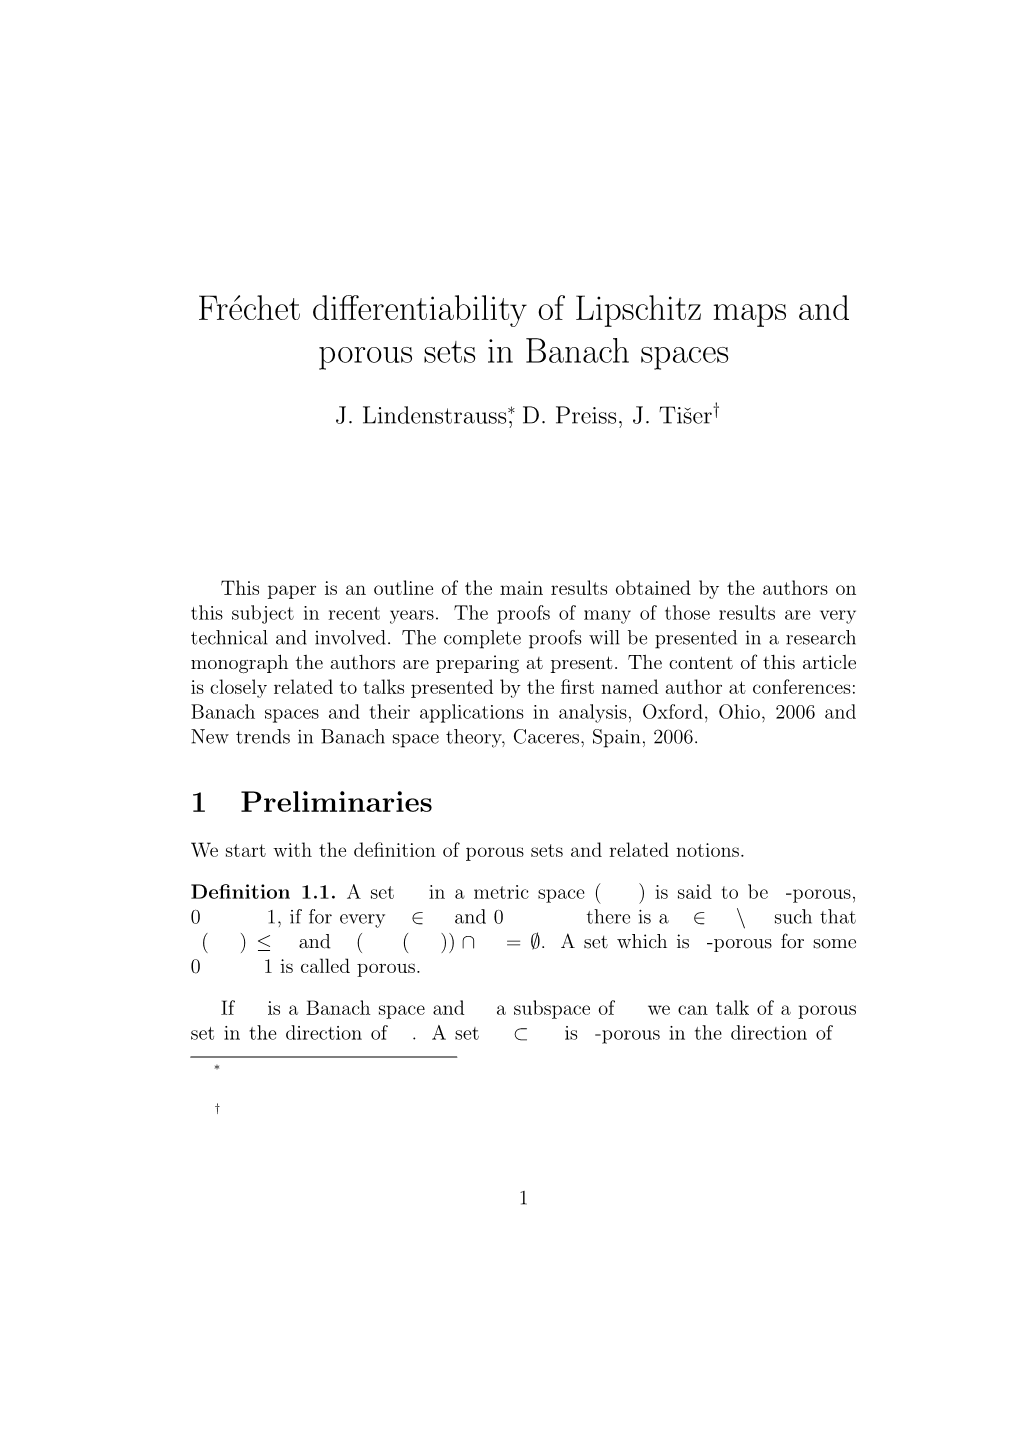 Fréchet Differentiability of Lipschitz Maps and Porous Sets in Banach